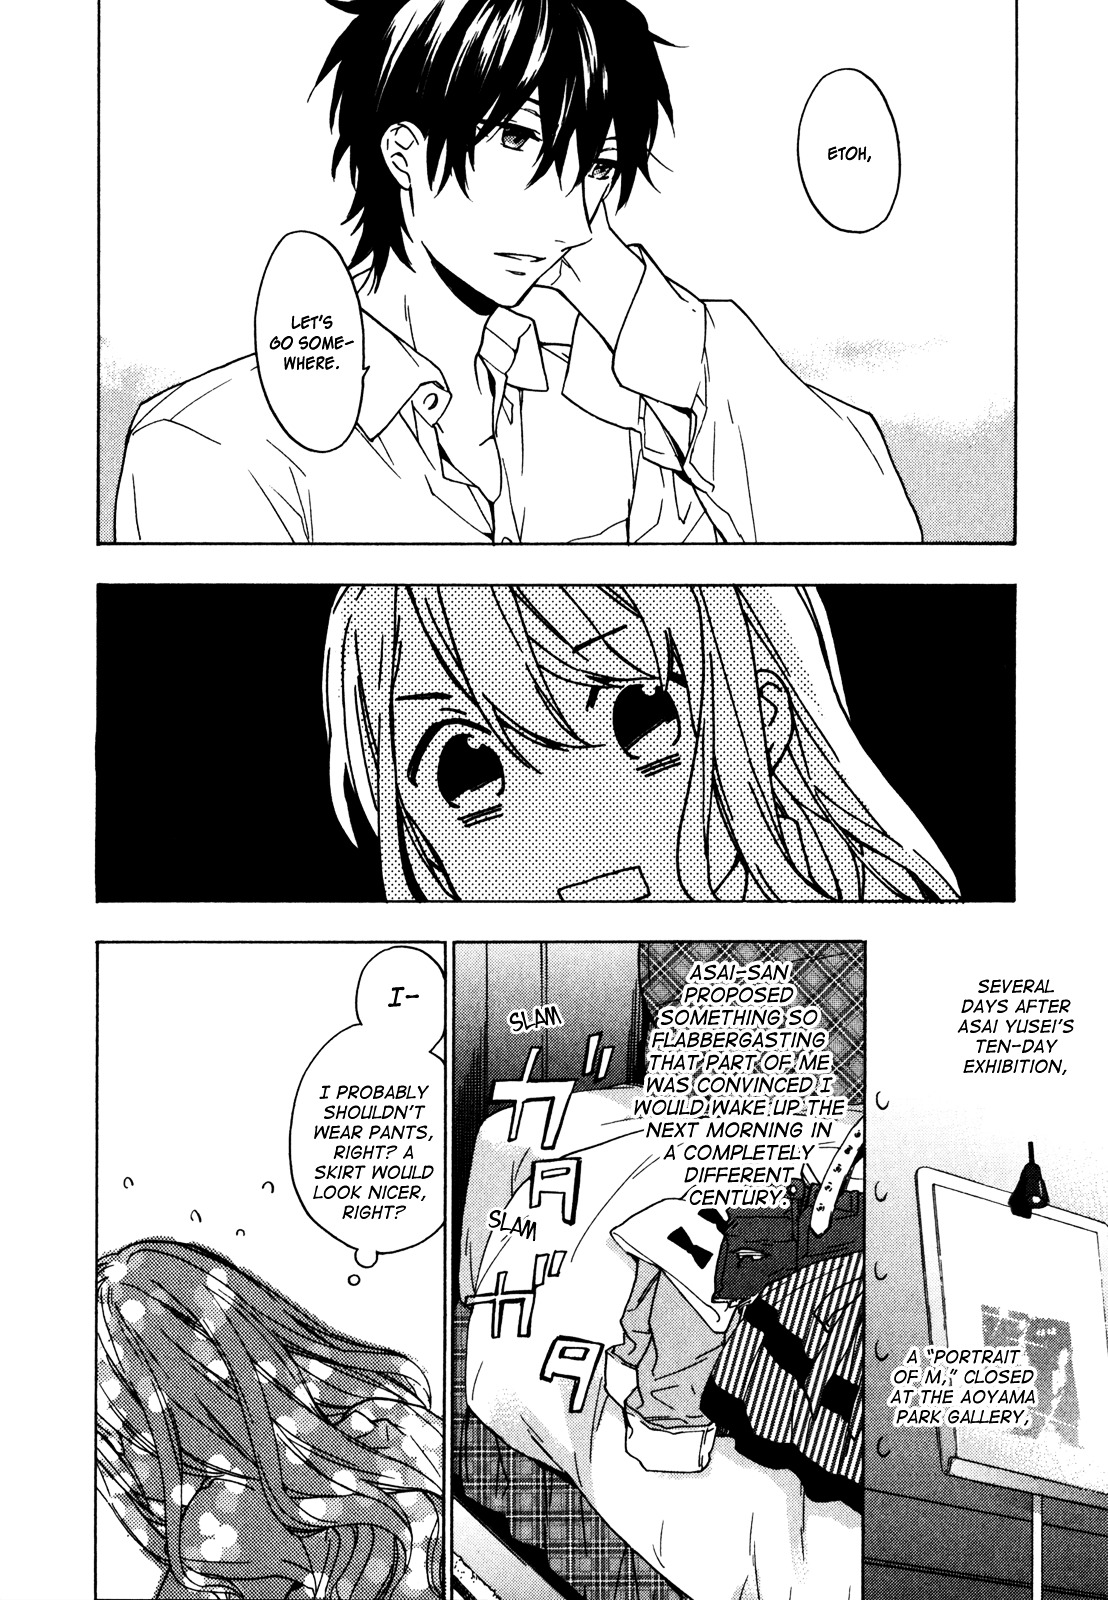 Torikagosou No Kyou Mo Nemutai Juunintachi Vol.3 Chapter 16 : Home: The Reasons We Run, And What It Means To Stay (I) - Picture 2